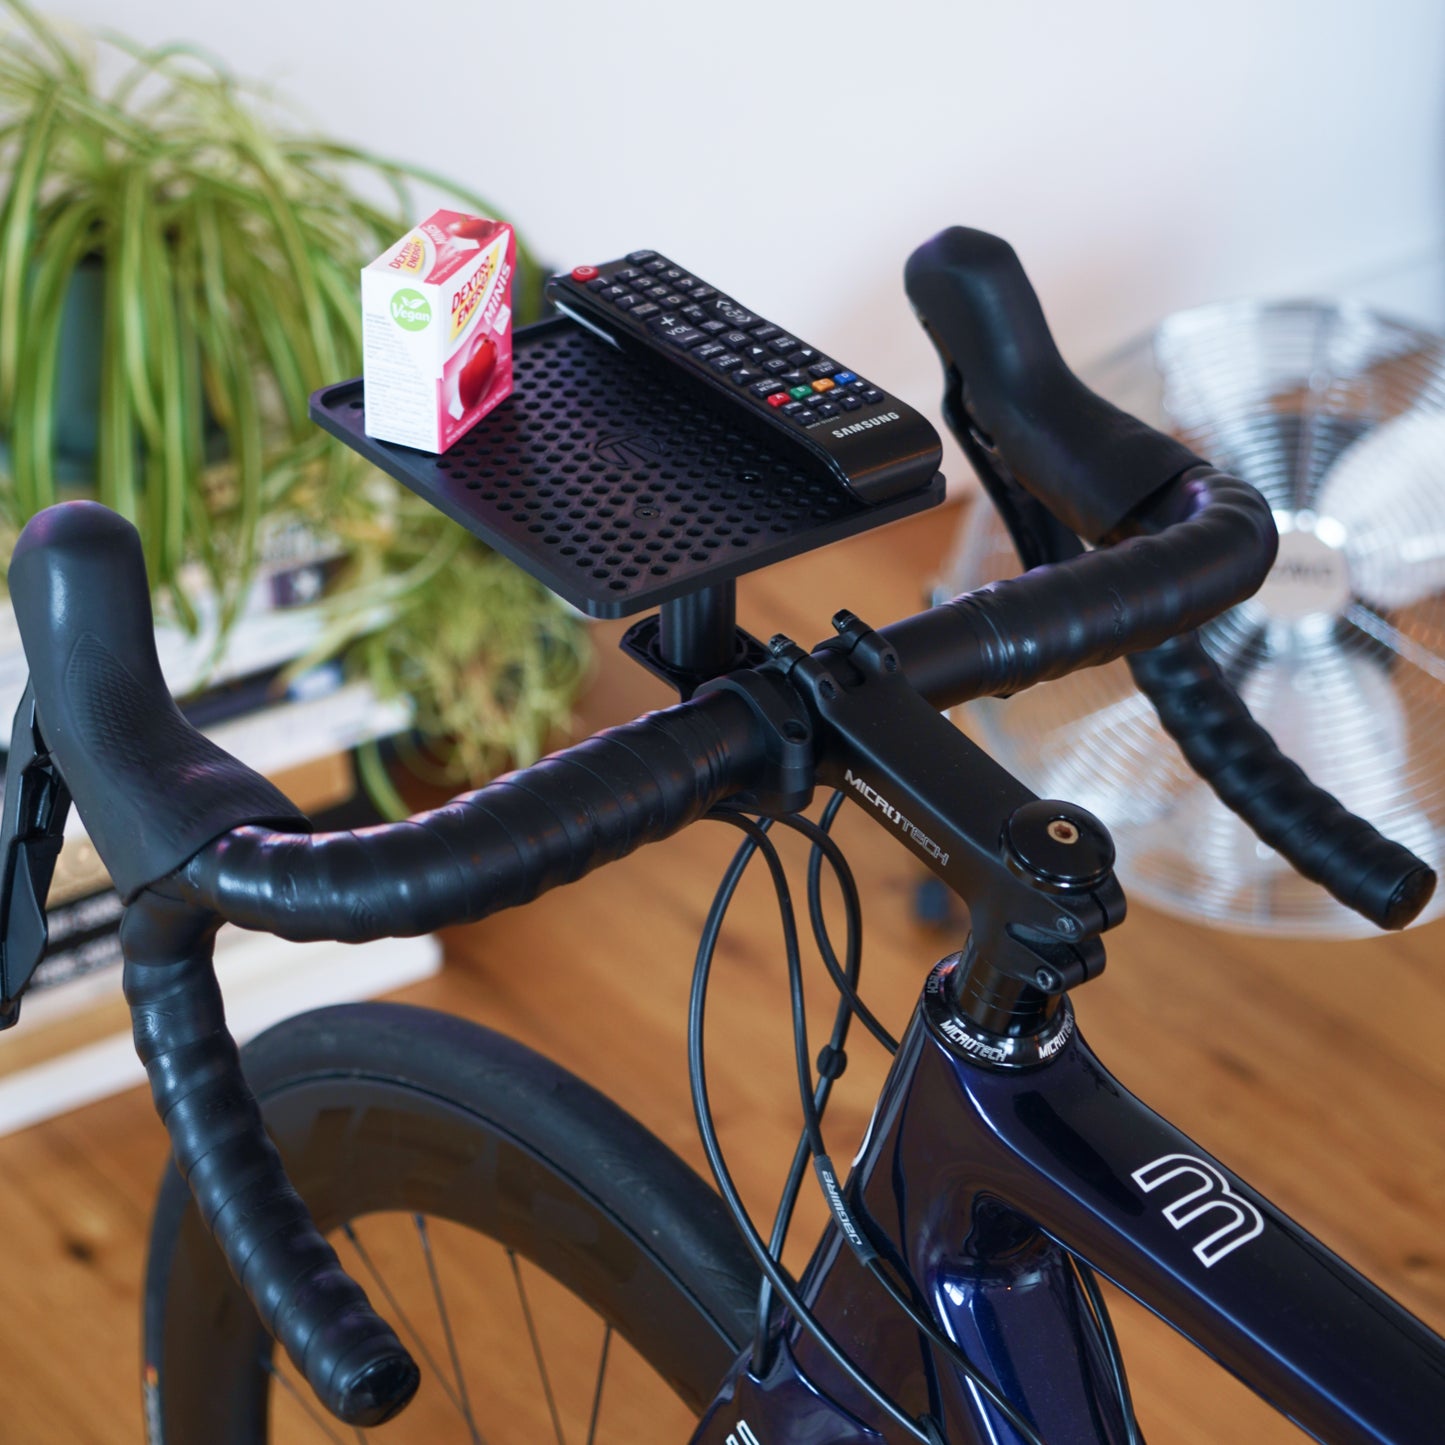 The Tray - Bike Mount Extension